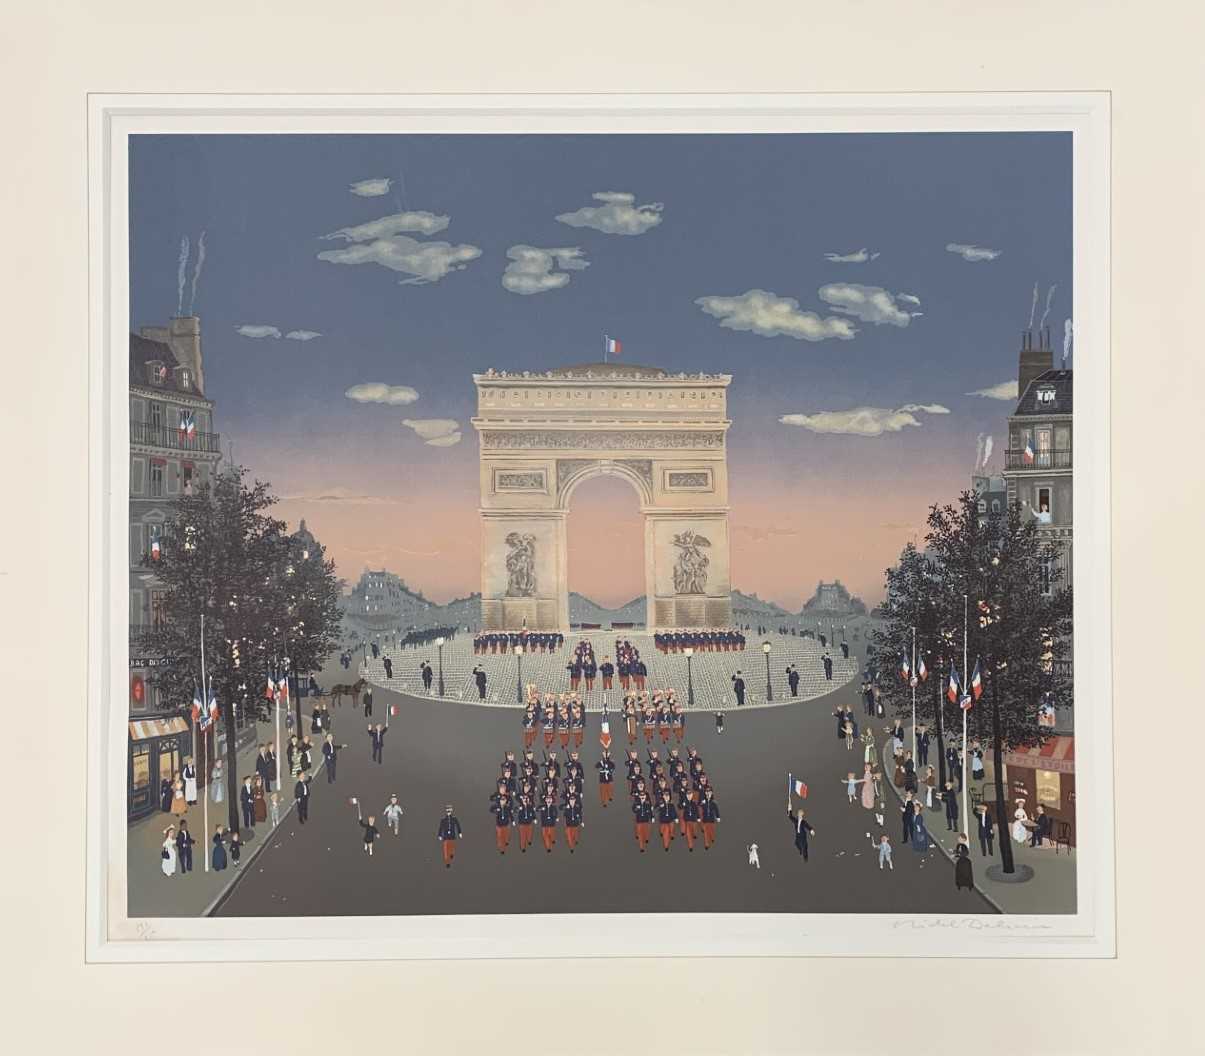 Michel Delacroix (French, b.1933), Street scene, limited edition lithograph, signed and numbered - Image 2 of 4